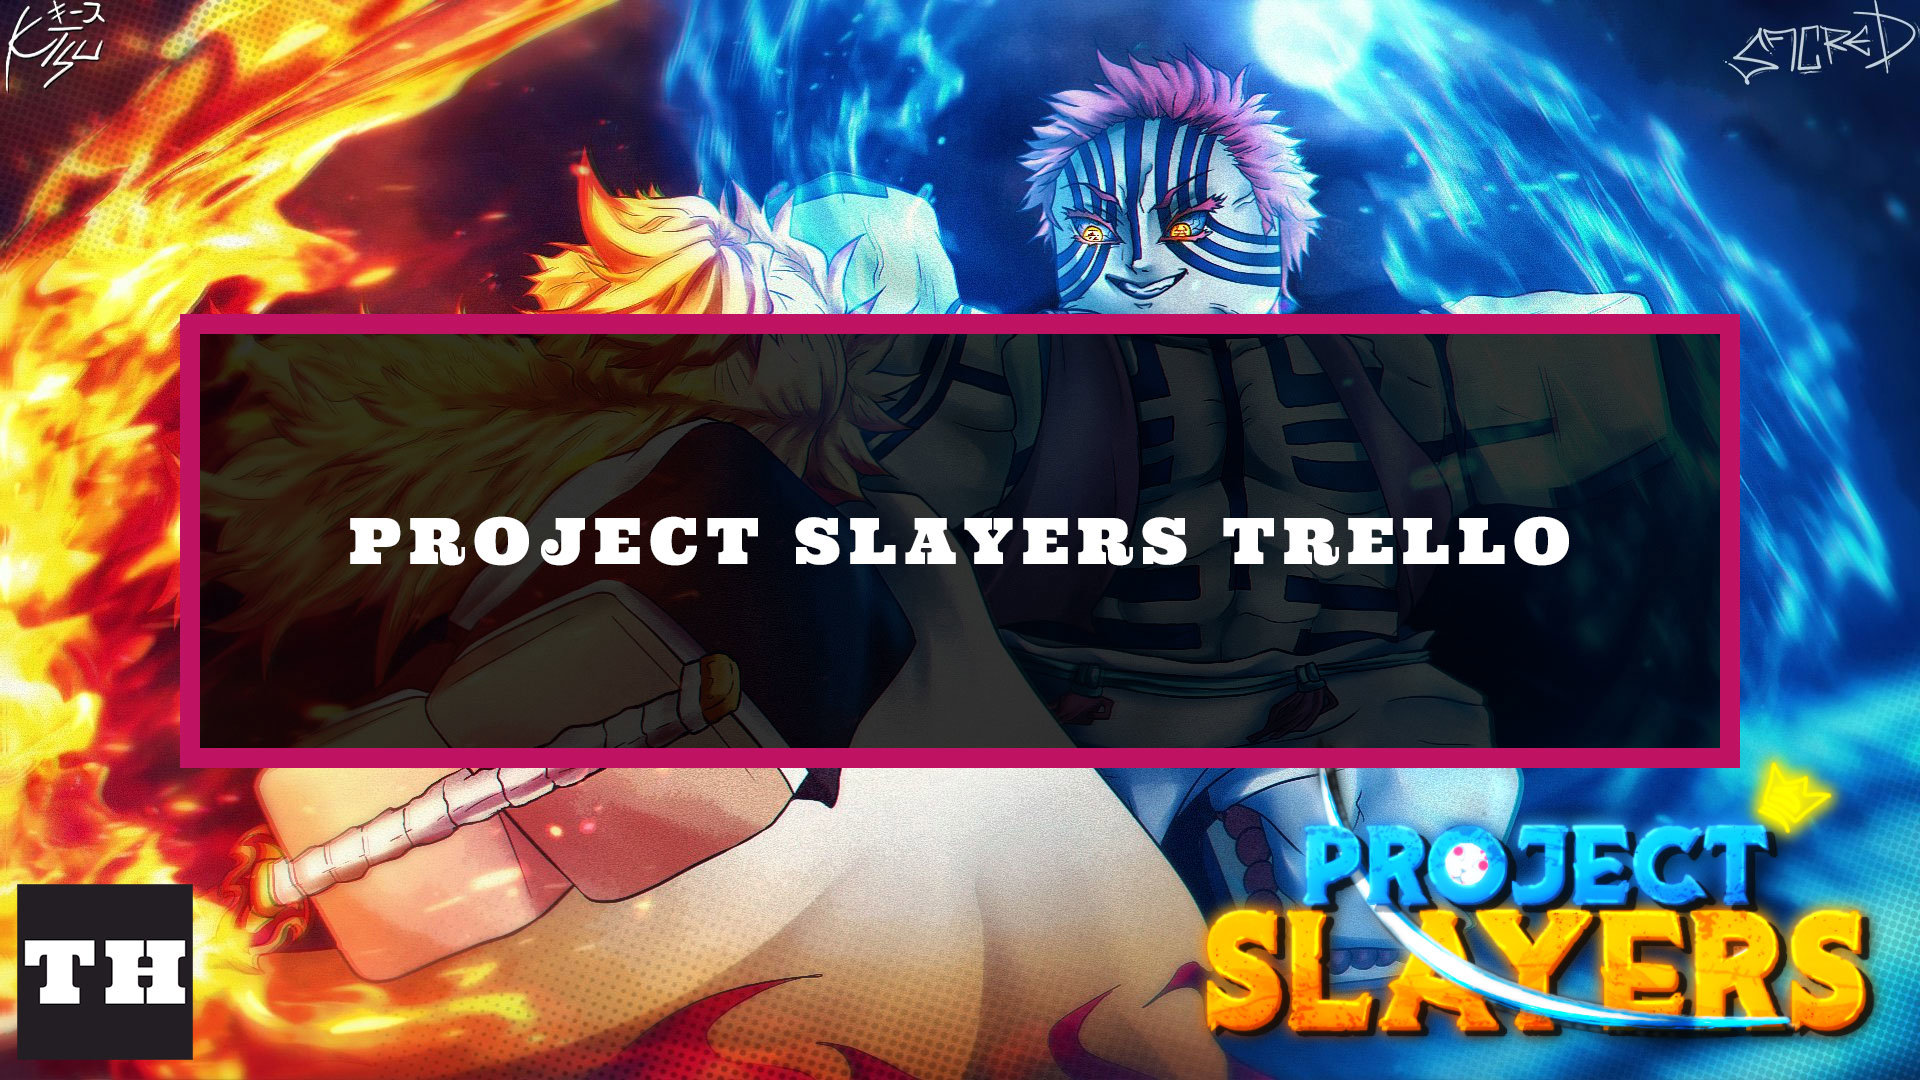 Trello Link and Wiki of Project Slayers